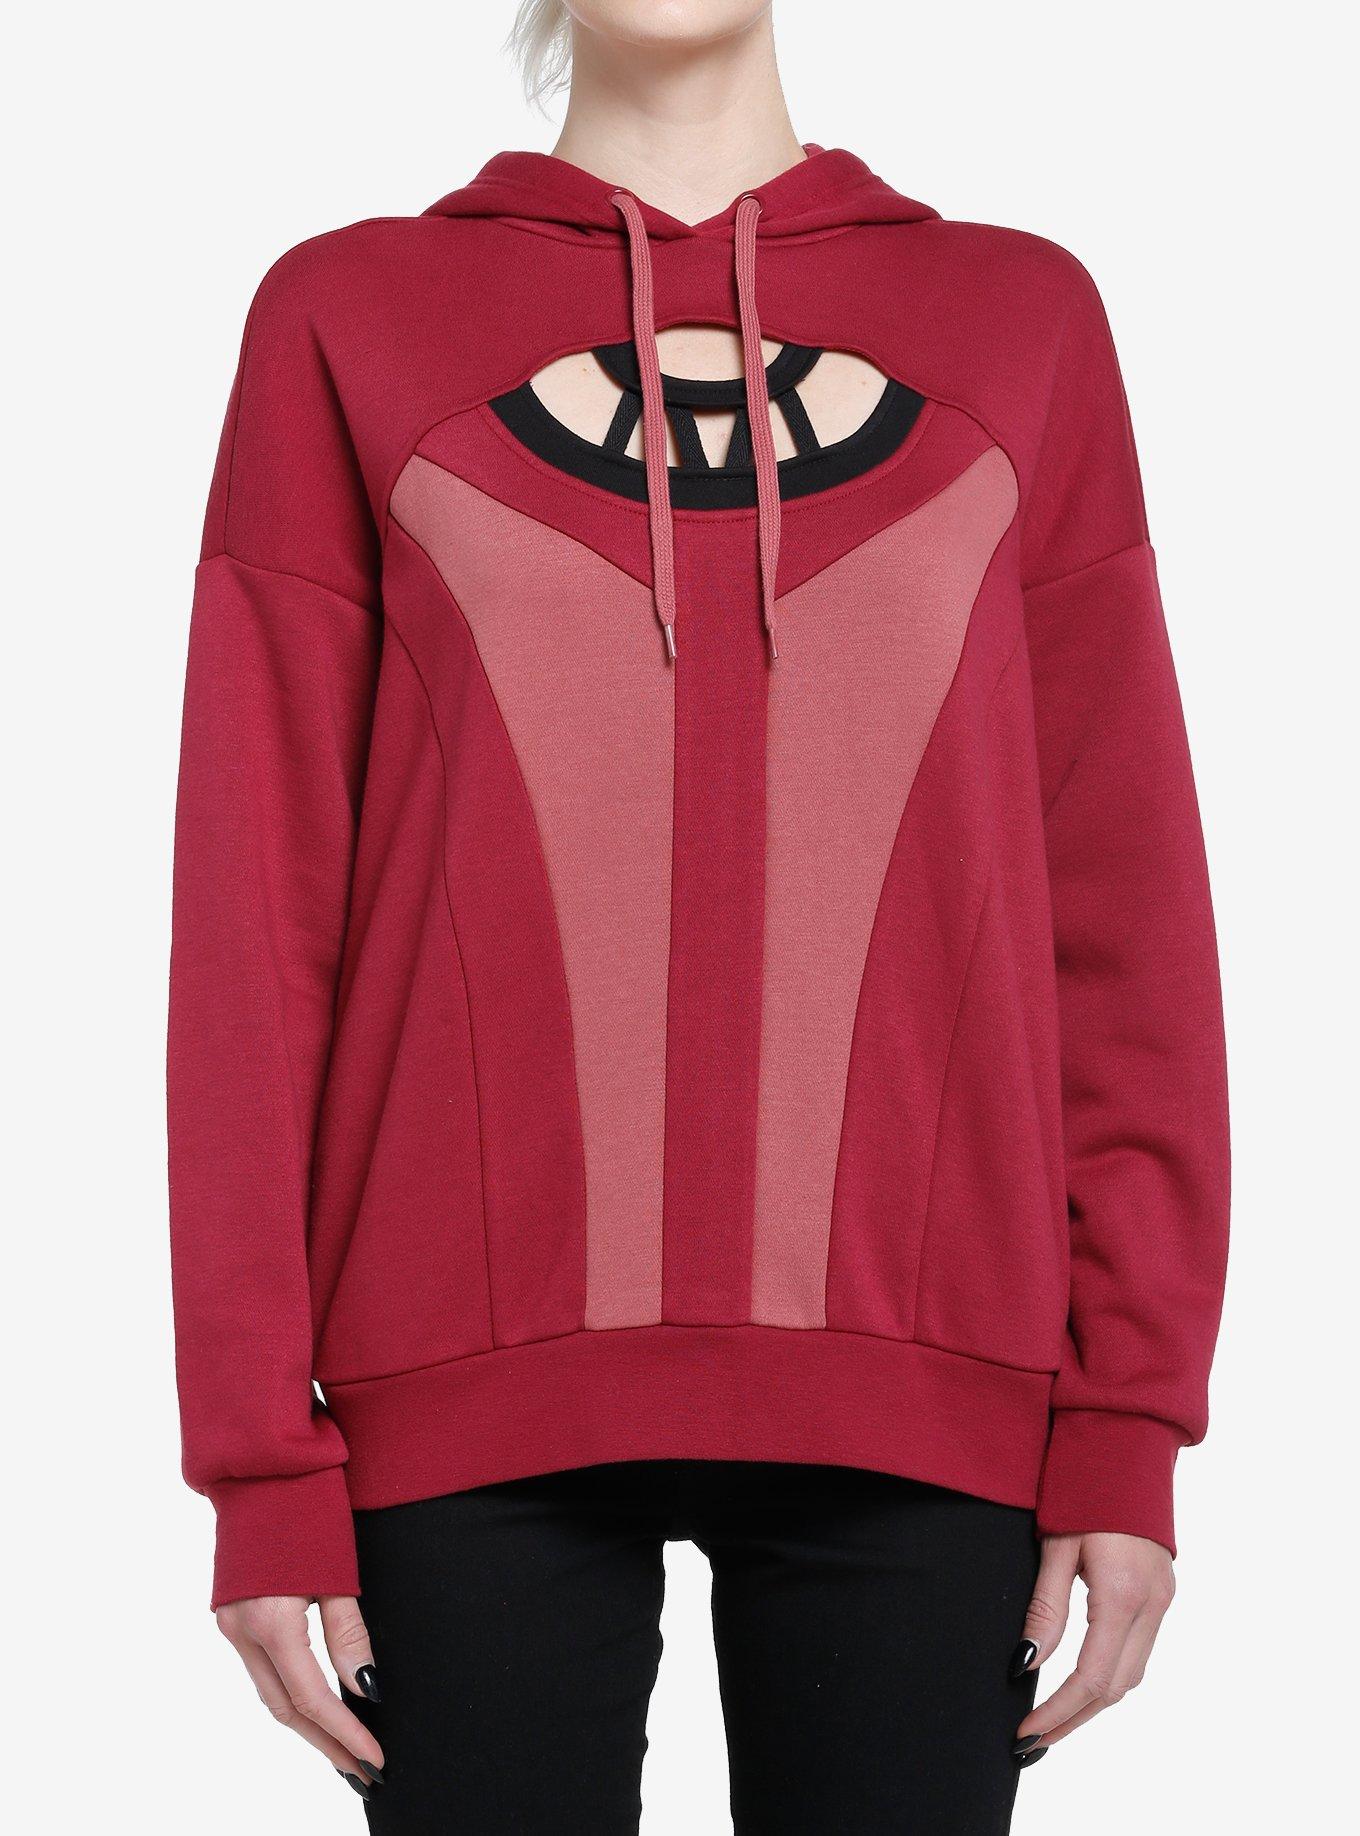 Her Universe Marvel Scarlet Witch Cutout Hoodie Her Universe Exclusive, RED, hi-res